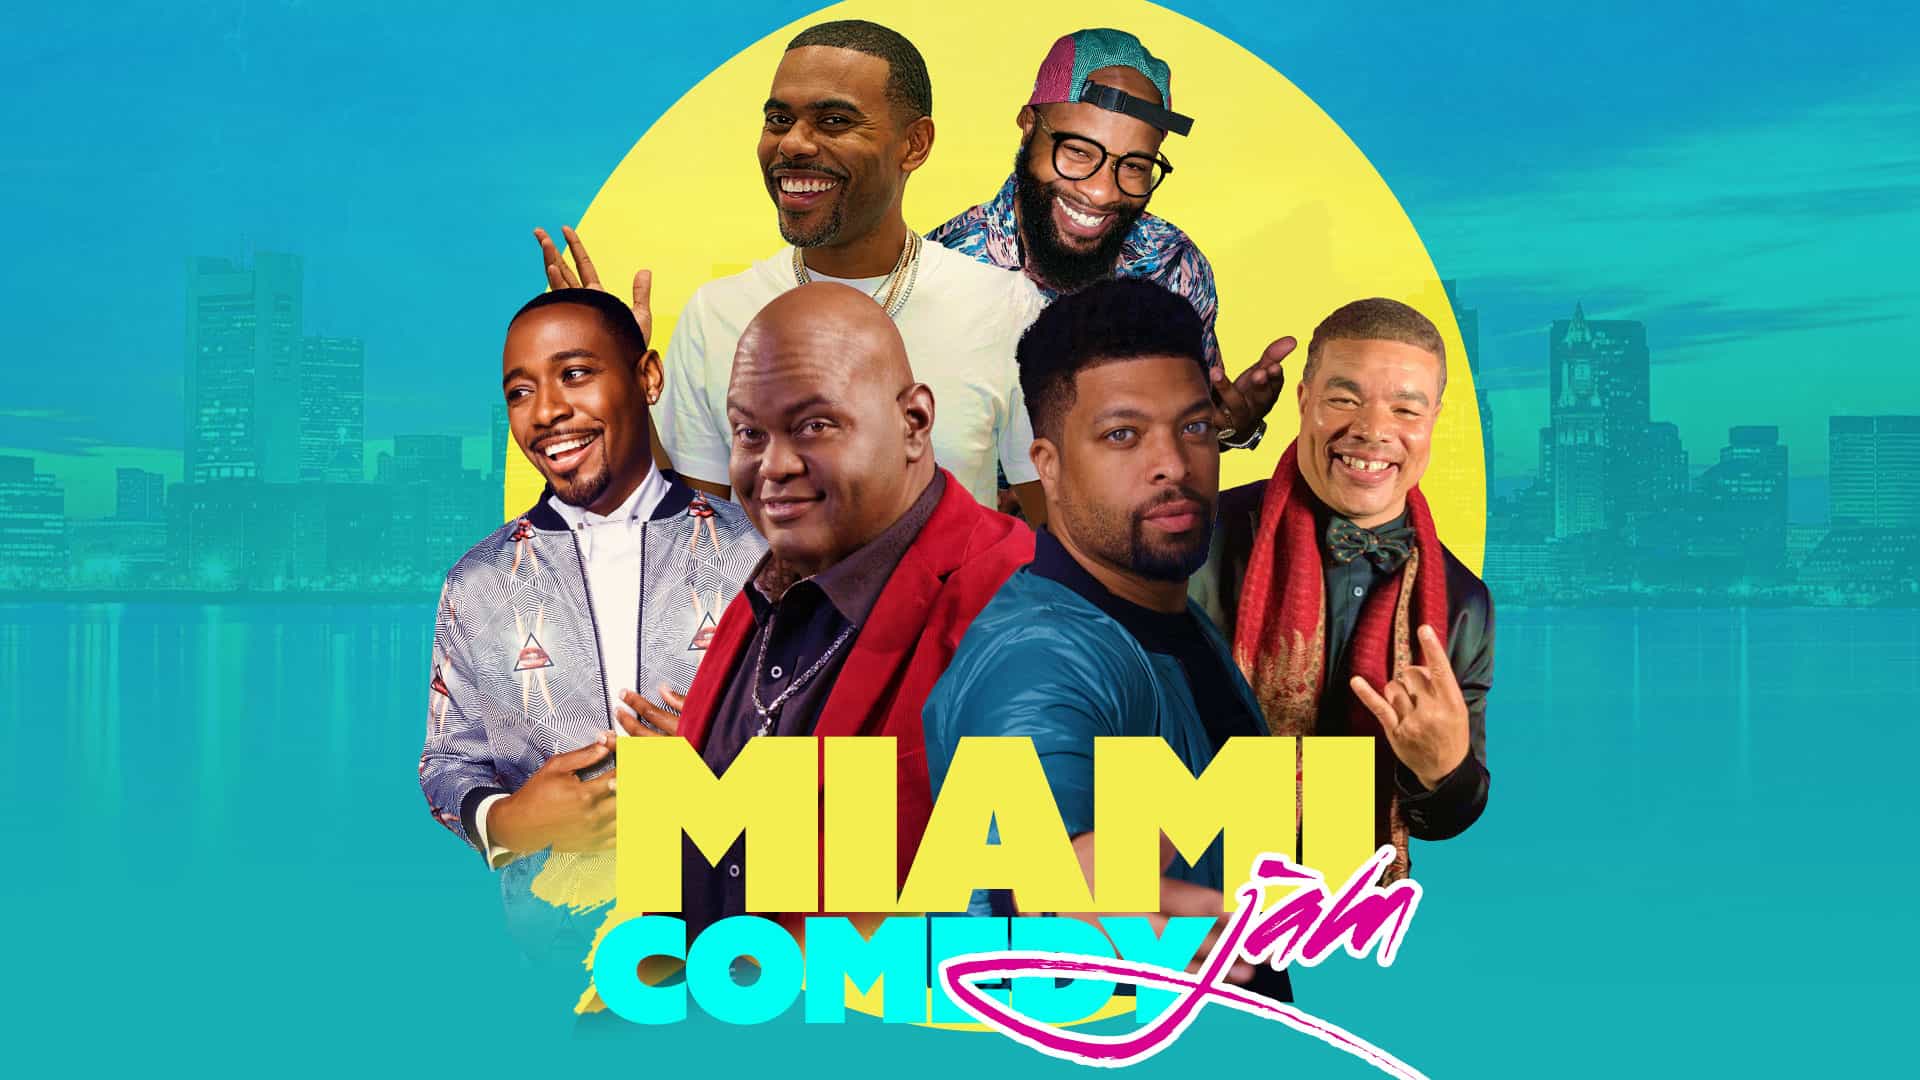 Miami Comedy Jam. Comedians include: Lavell Crawford, DeRay Davis, Lil Duval, Chico Bean, Red Grant, & Kountry Wayne